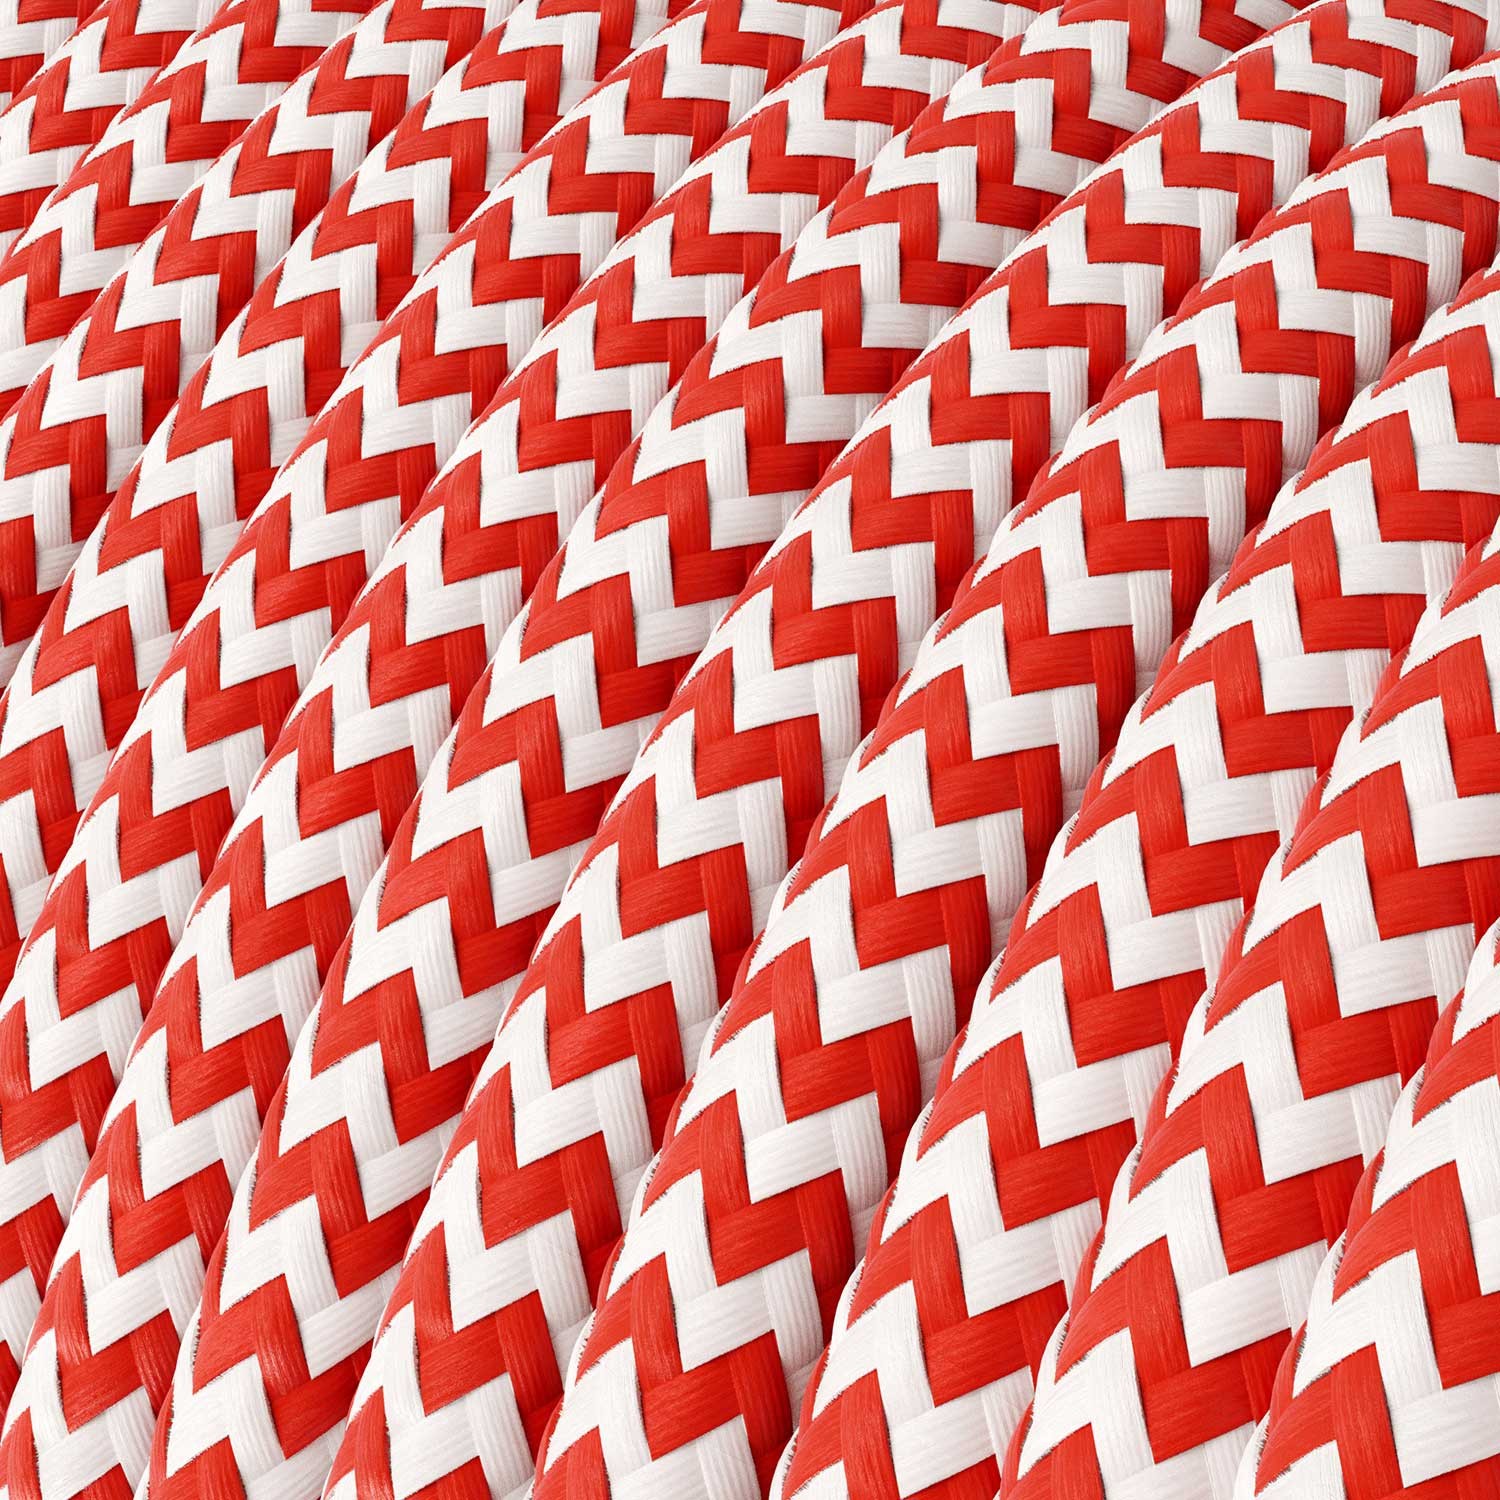 Round Electric Cable covered by Rayon fabric ZigZag RZ09 Red